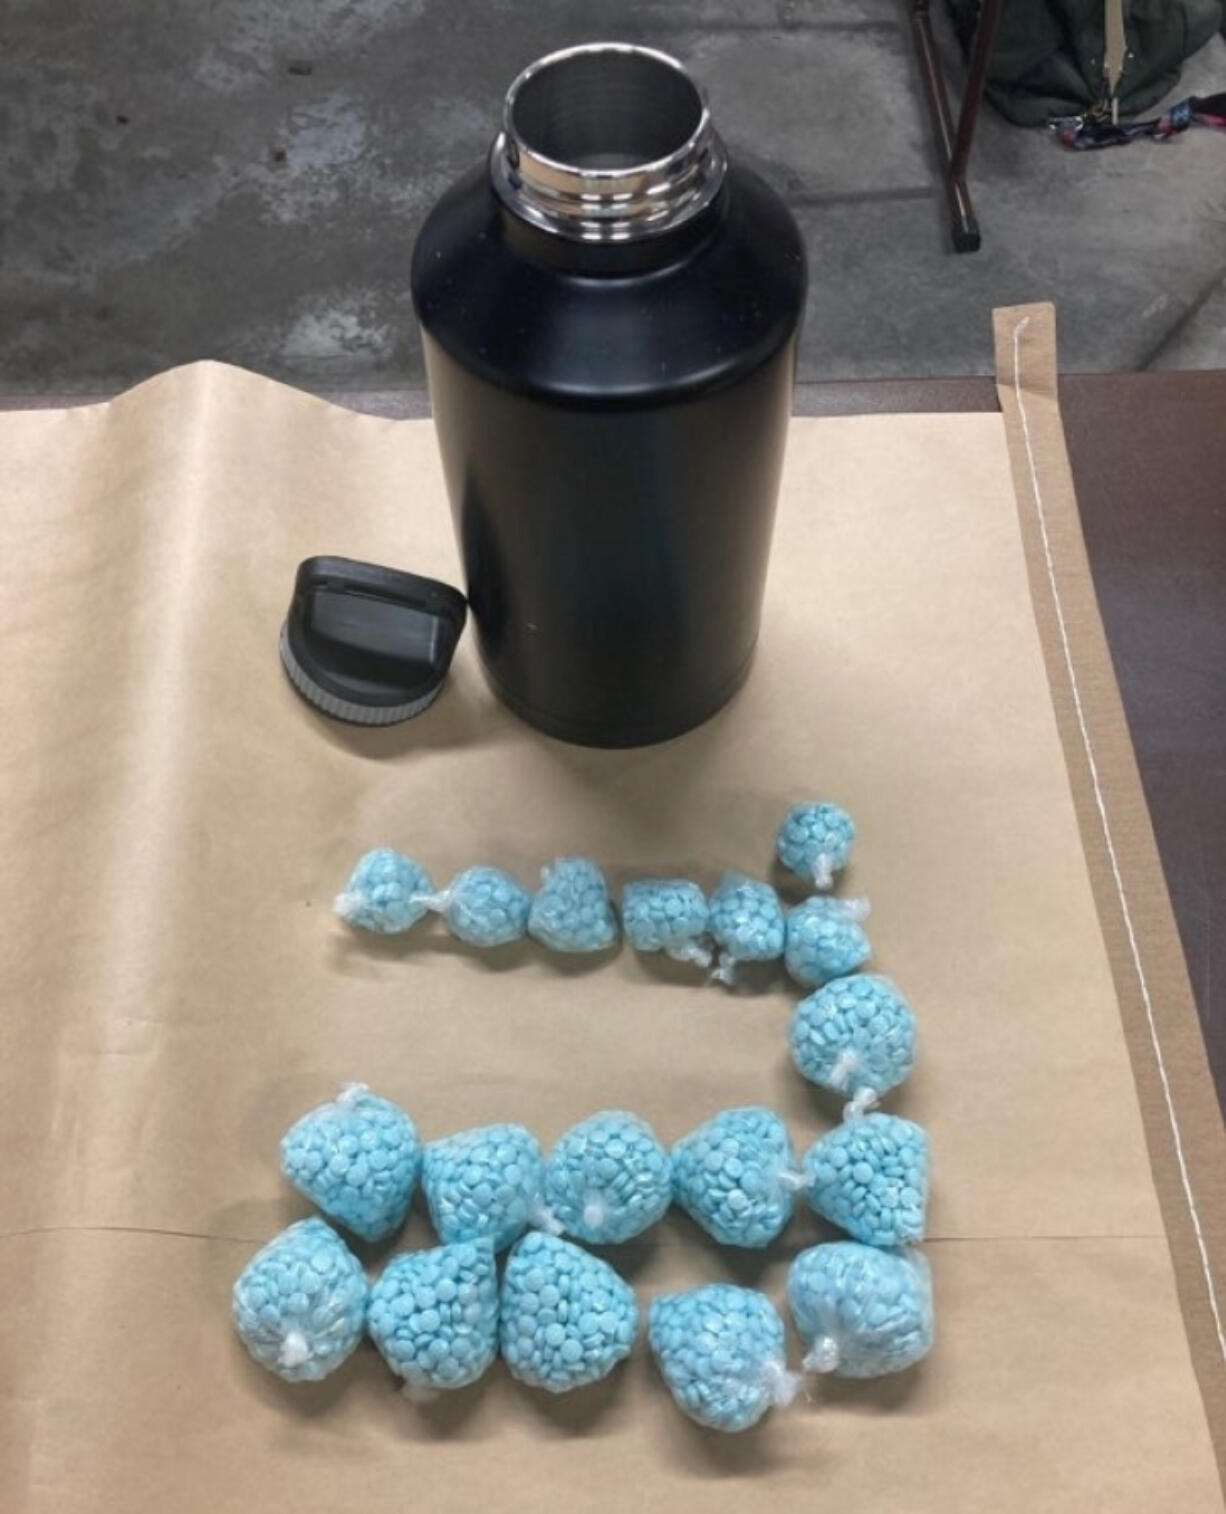 Blue pills police found inside a Vancouver hotel room that they believe to be fentanyl. Police arrested Frank L. Hamil, 37, Friday afternoon on suspicion of possession of a controlled substance with intent to deliver, among other charges.